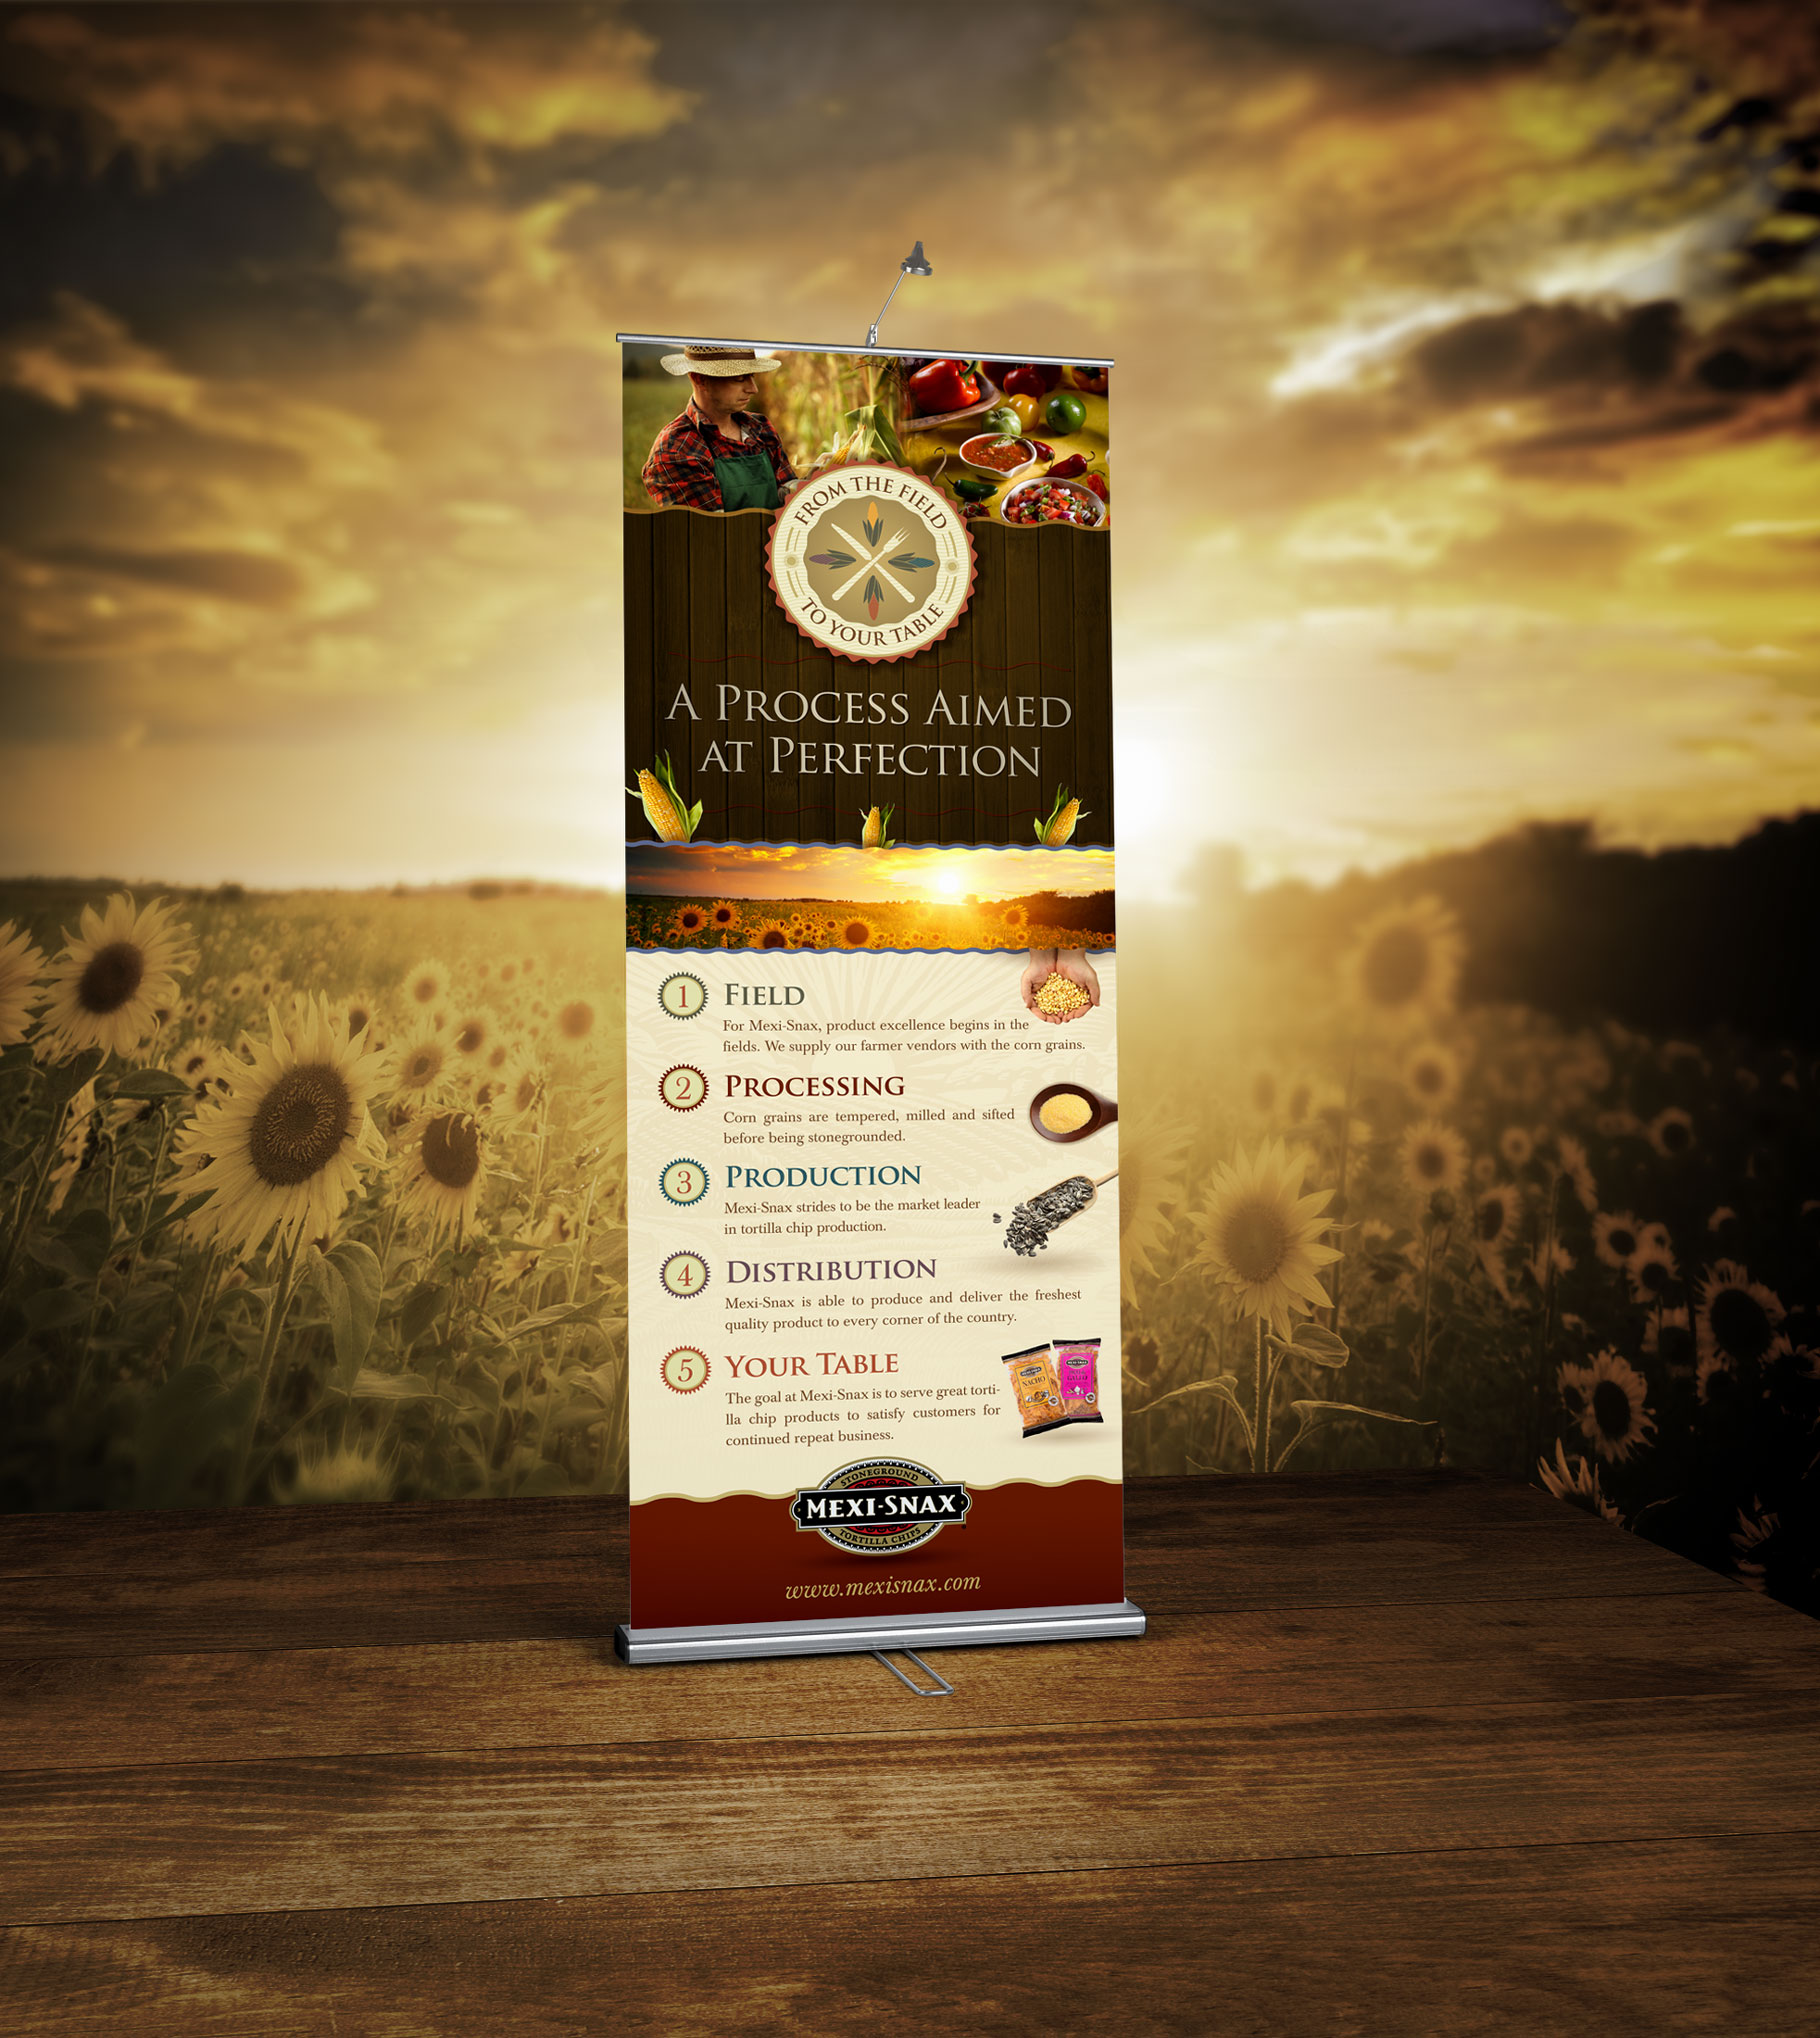 Mexi-Snax Field to Table Roll-up Banner Design